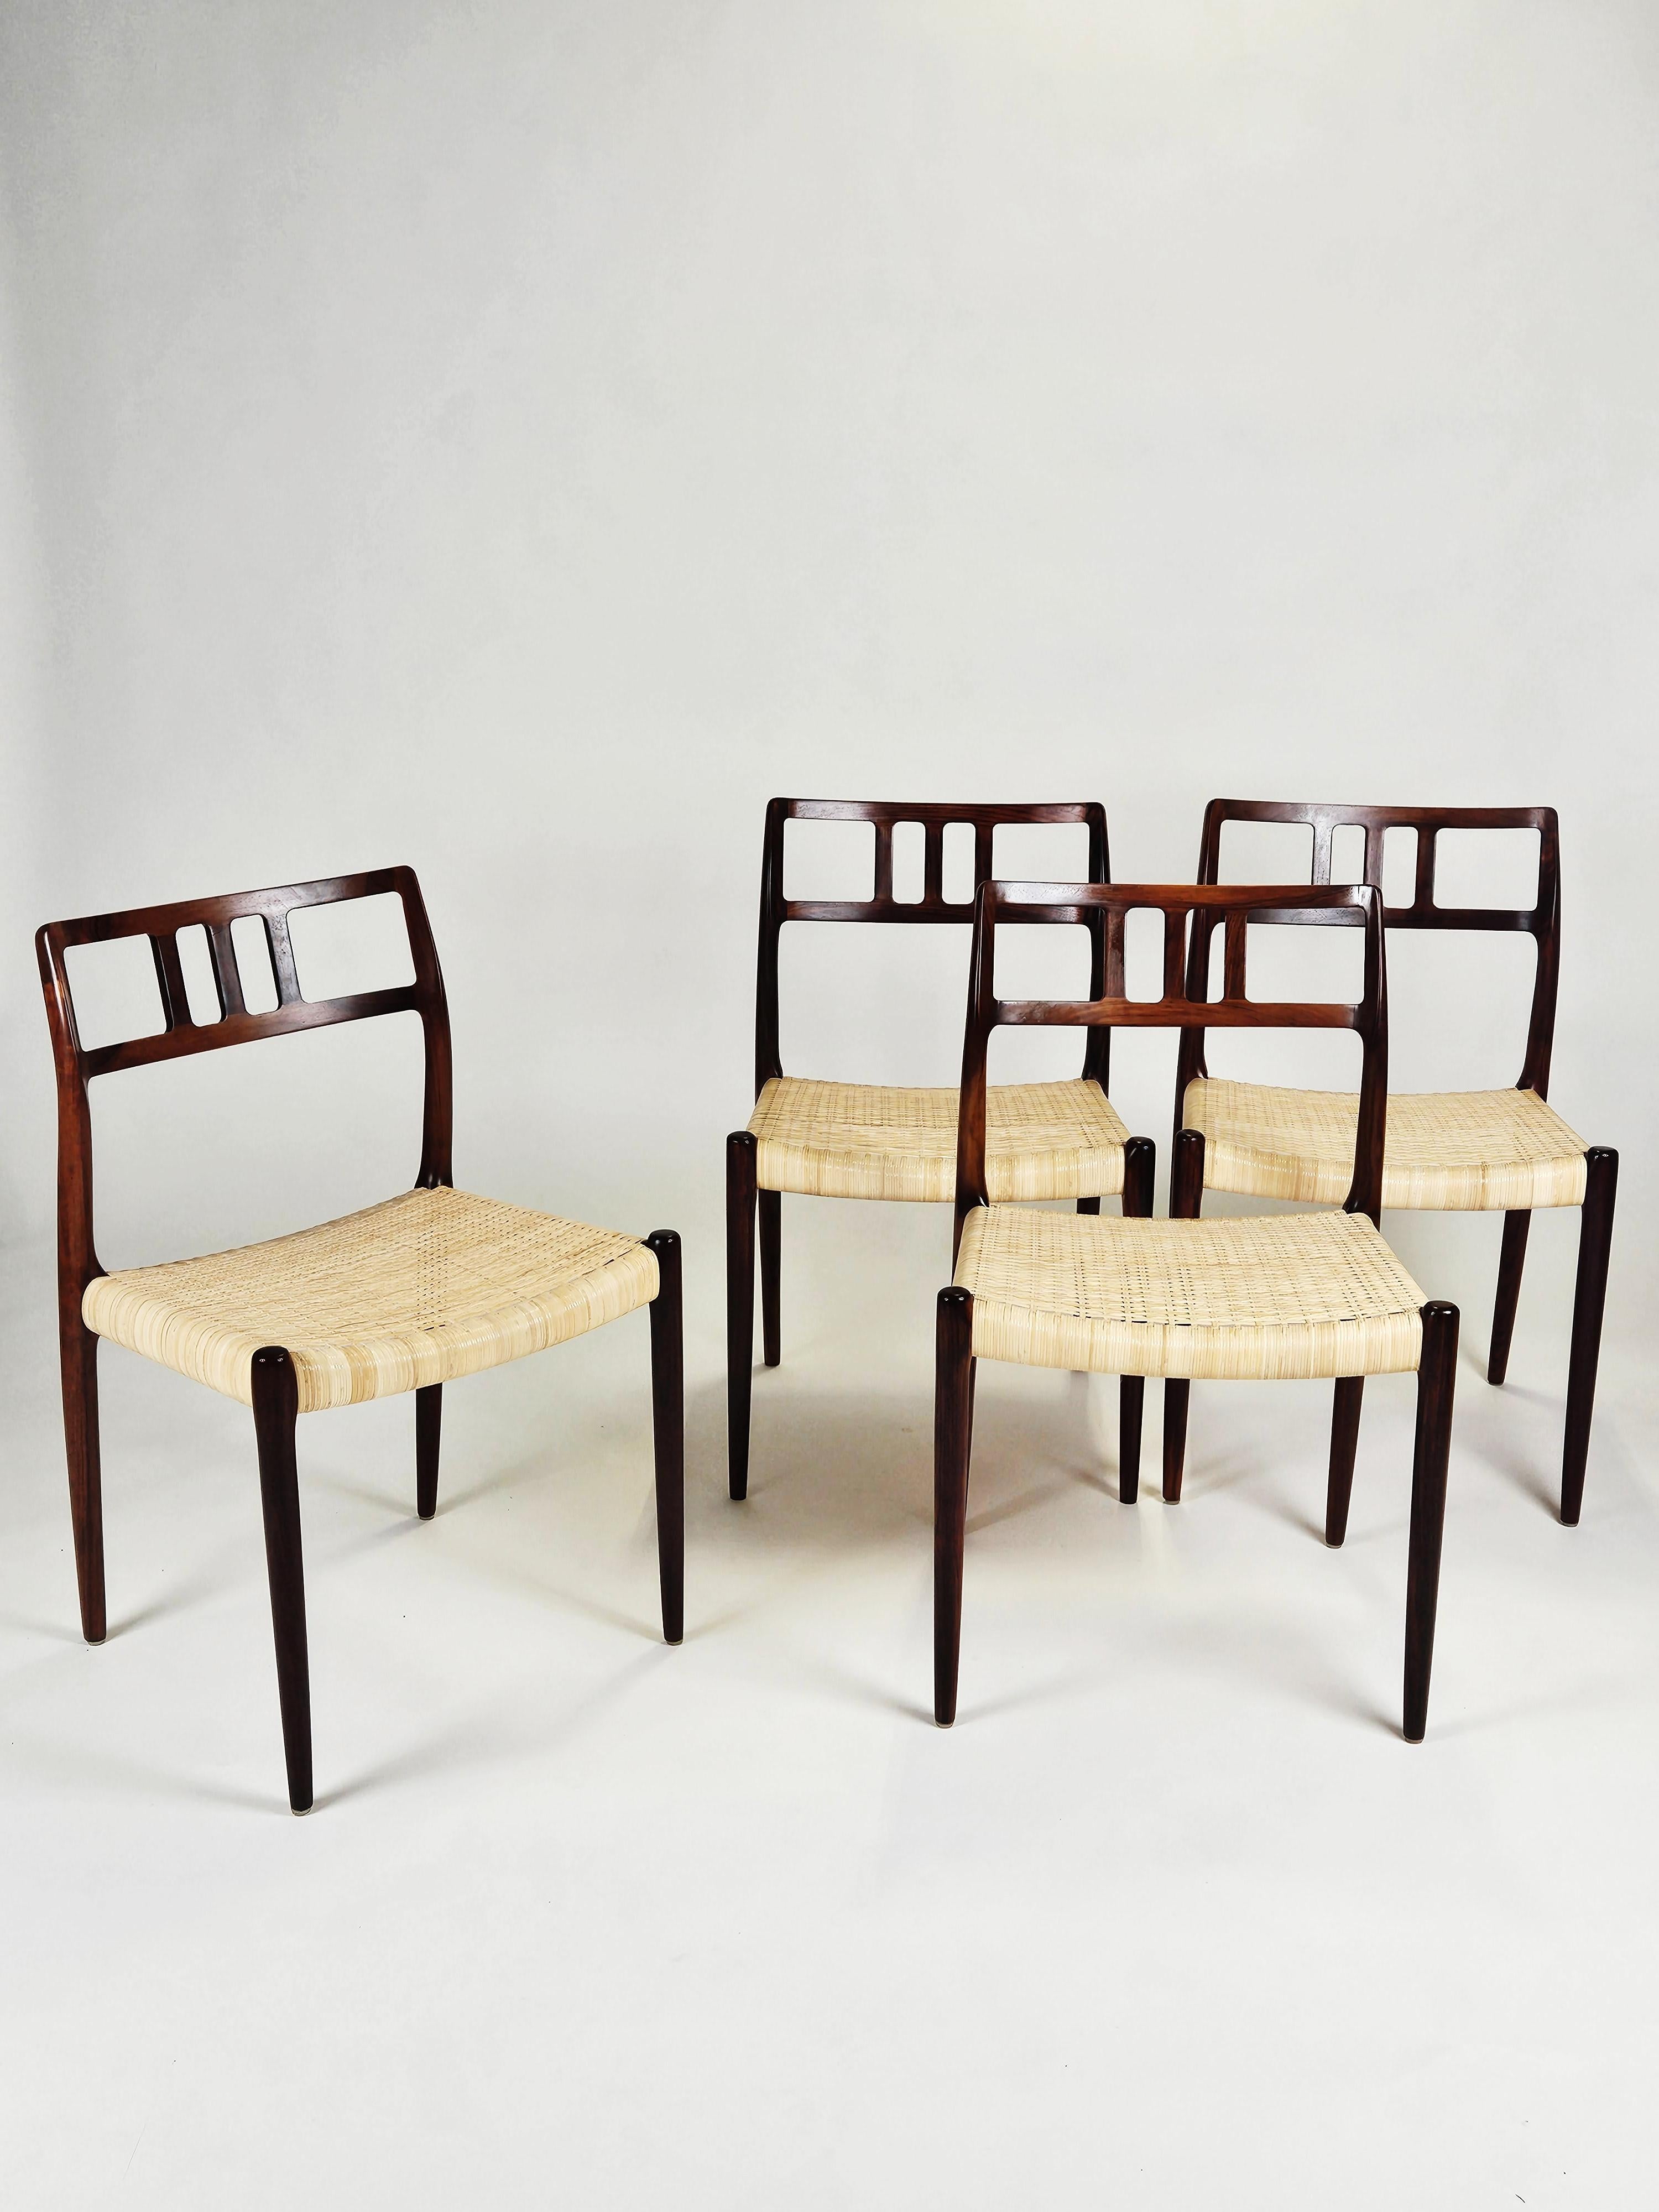 Big set of 14 dining chairs model 79 designed by Niels O. Møller. Produced by J.L Møllers møbelfabrik in Denmark during the 1960s.

Made in rosewood with seats of woven cane. 

Very good vintage condition. 